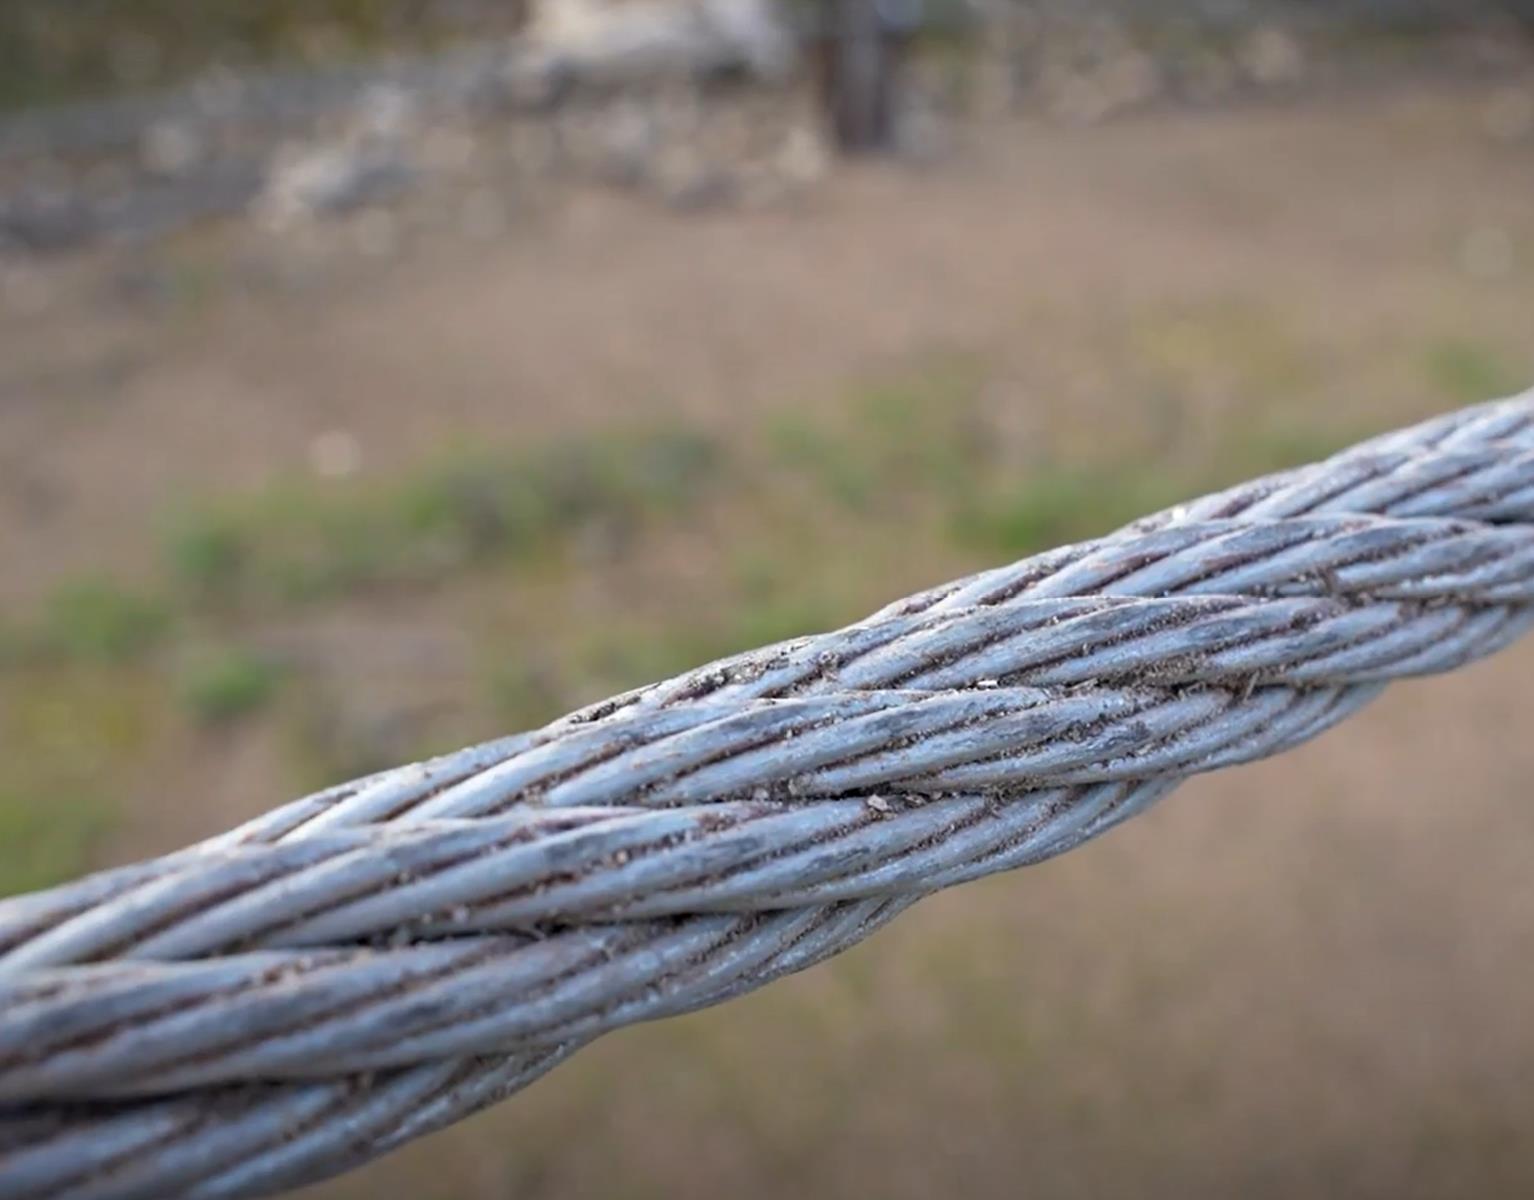 Close up of the cable, which is a woven metal cable about 22mm in width.